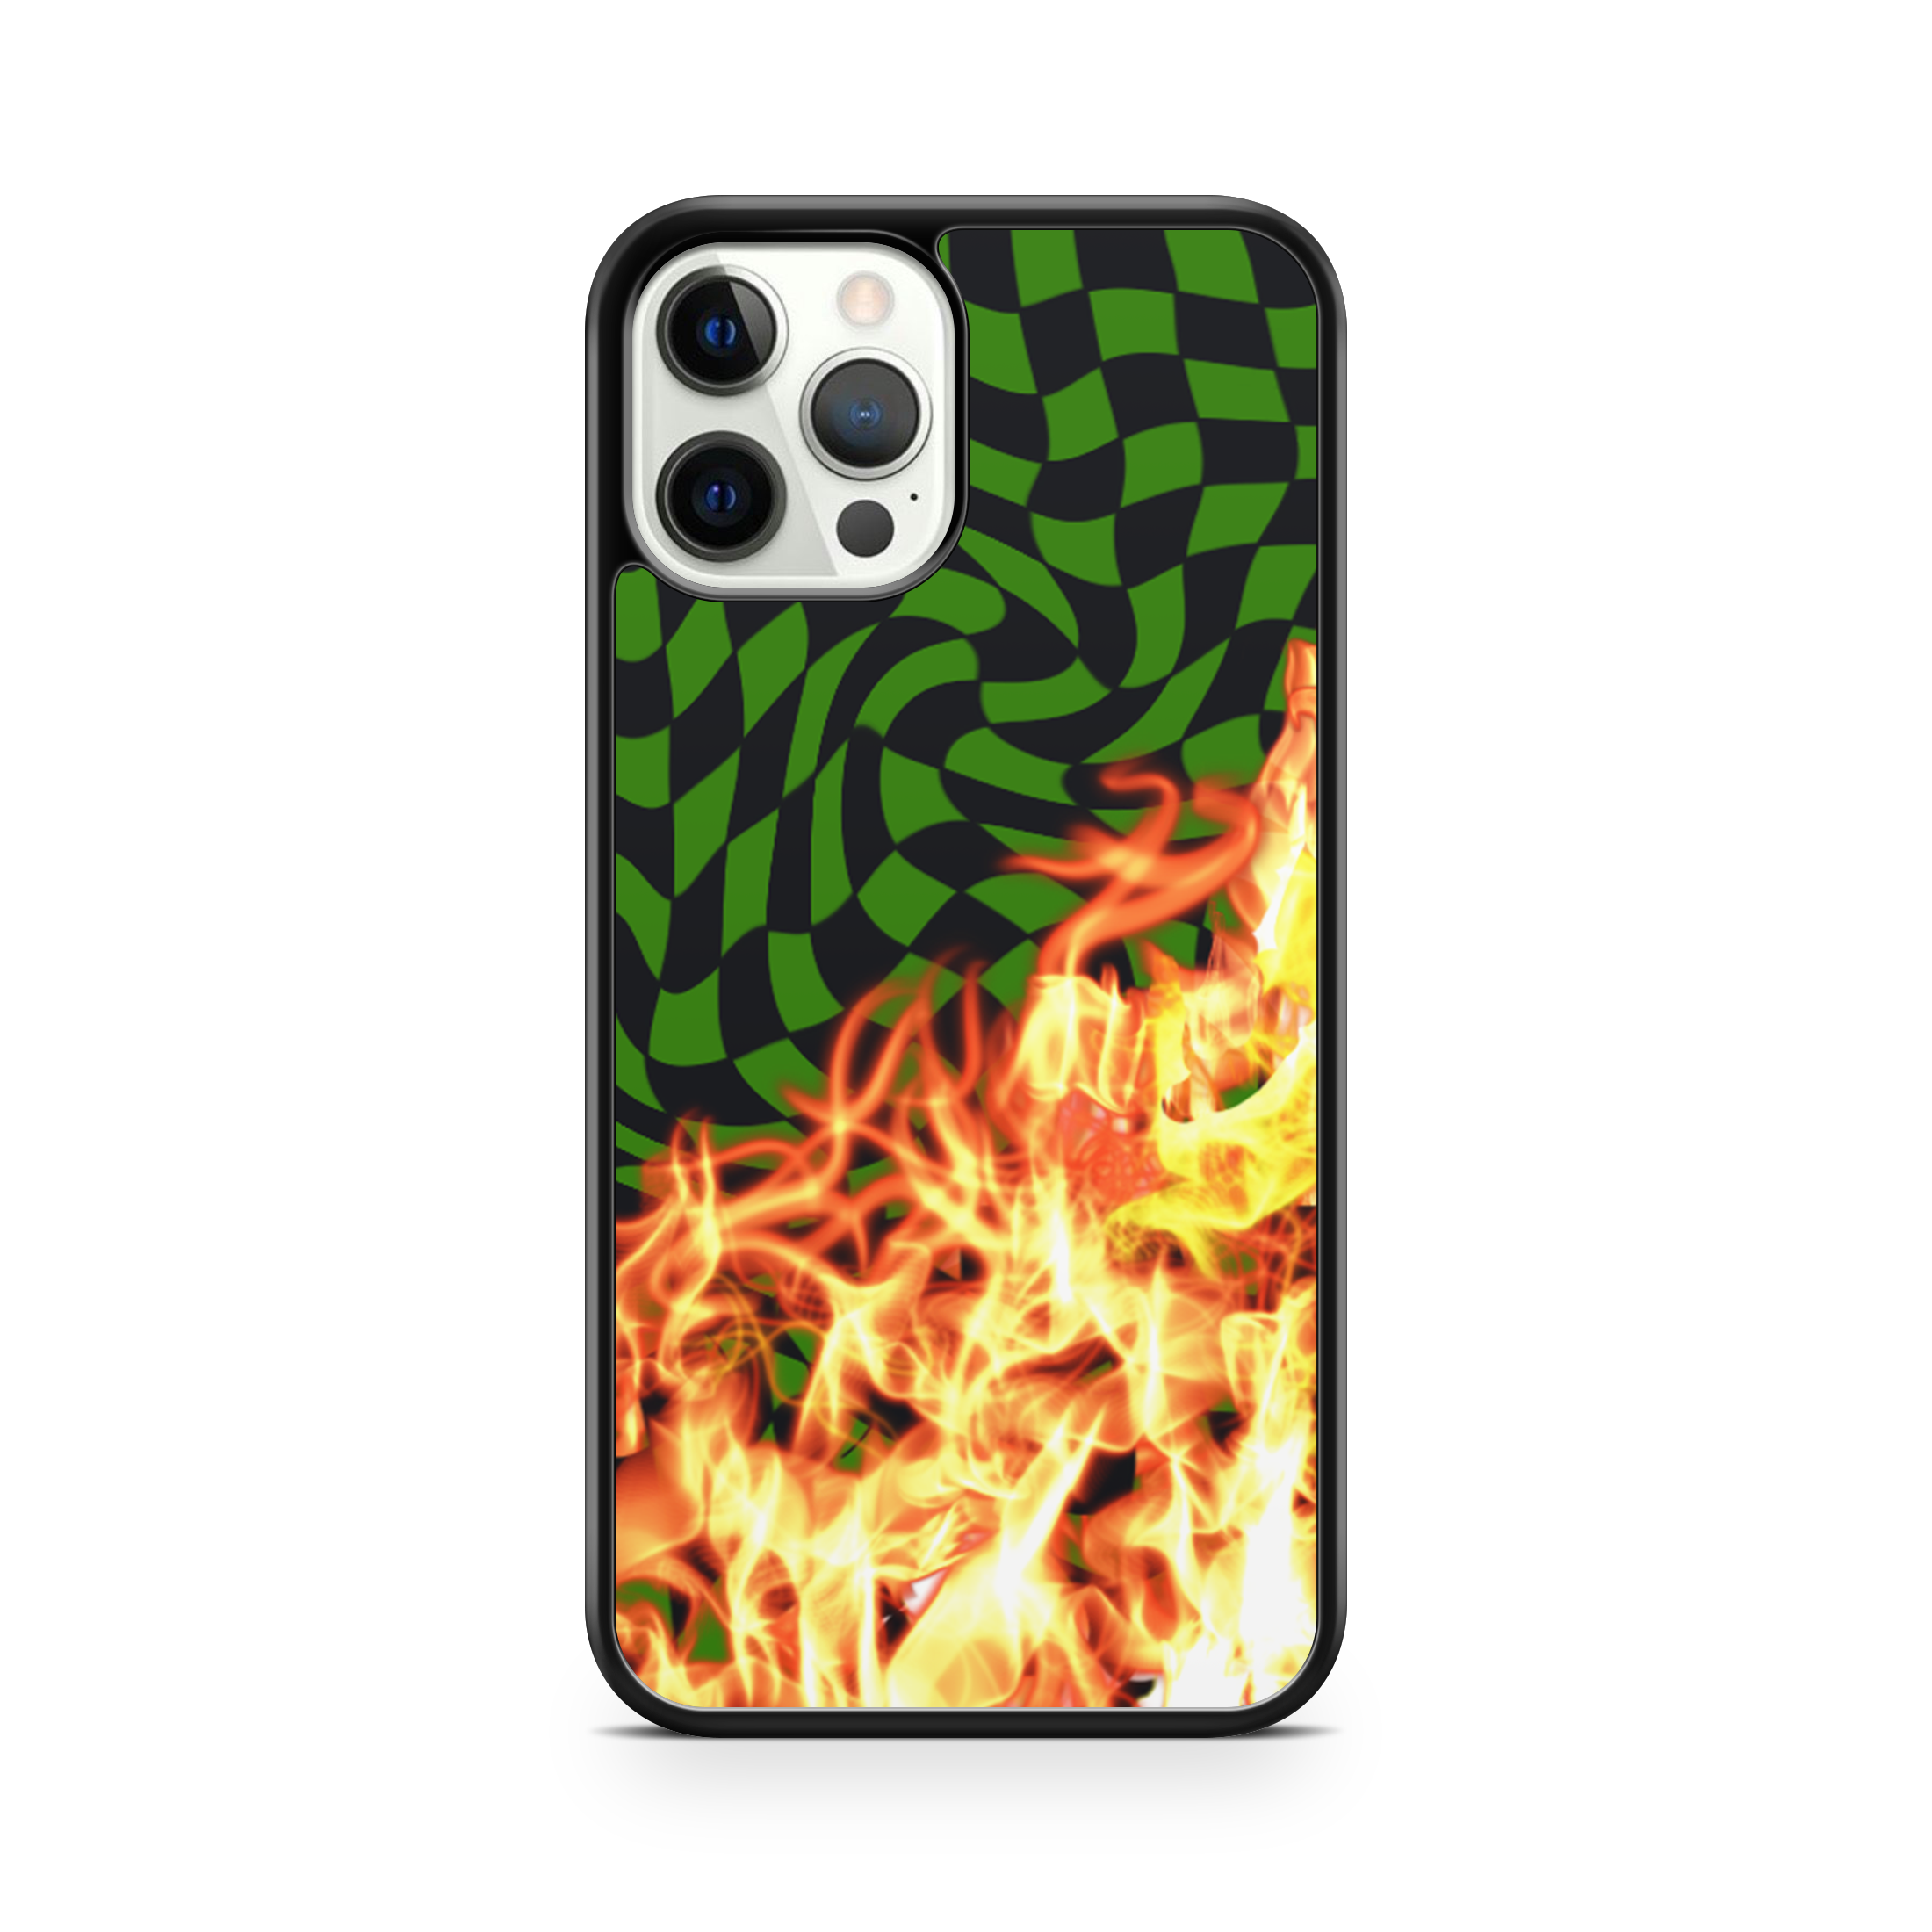 Racing green and black checkered design with orange flames phone case